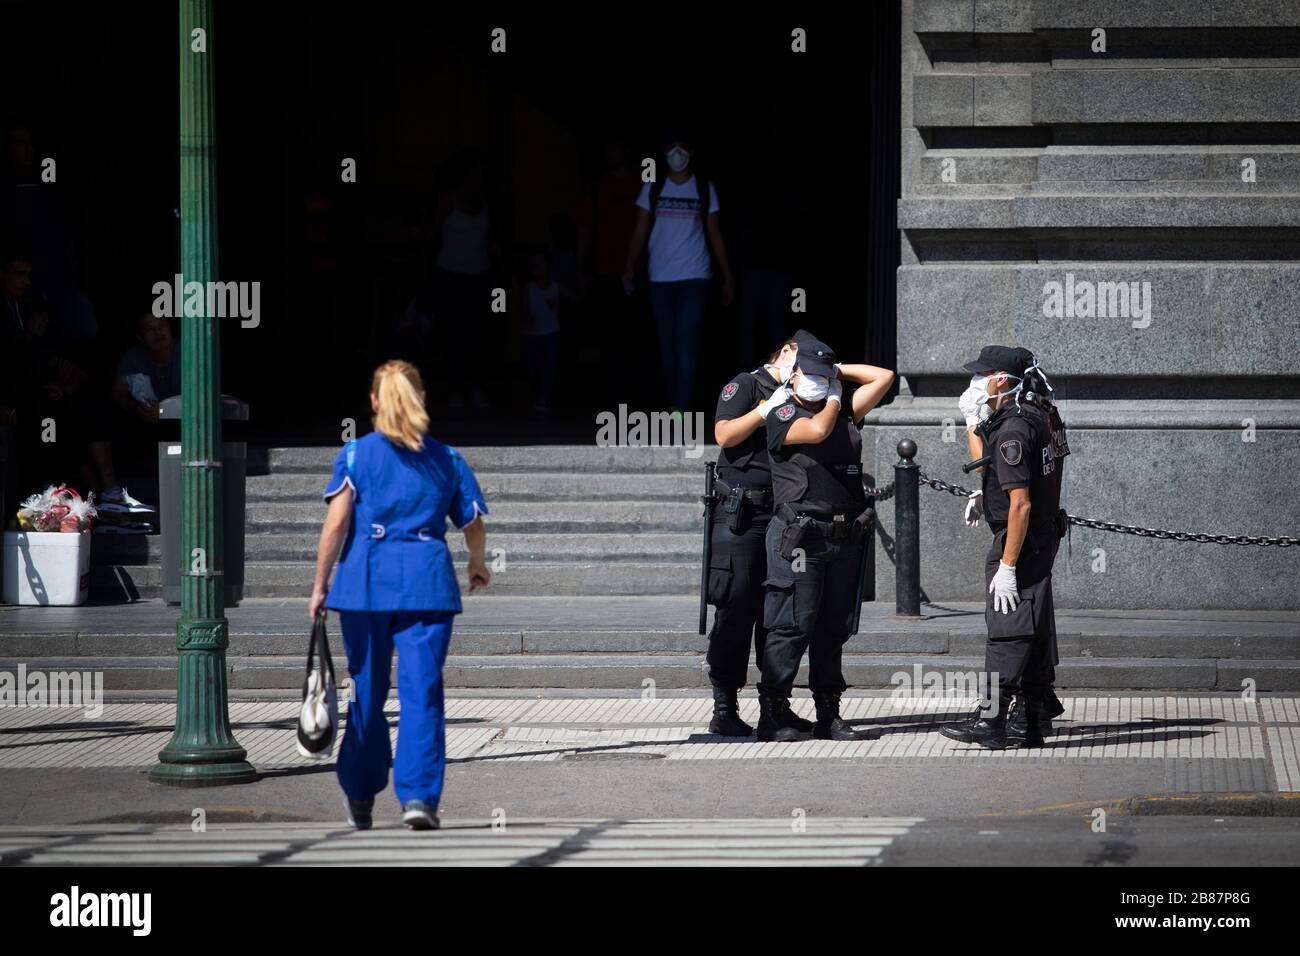 Buenos Aires, Argentina - March 20, 2020: Police putting the chinstrap masks the day after the state of emergency quarentine In Buenos Aires, Argentin Stock Photo